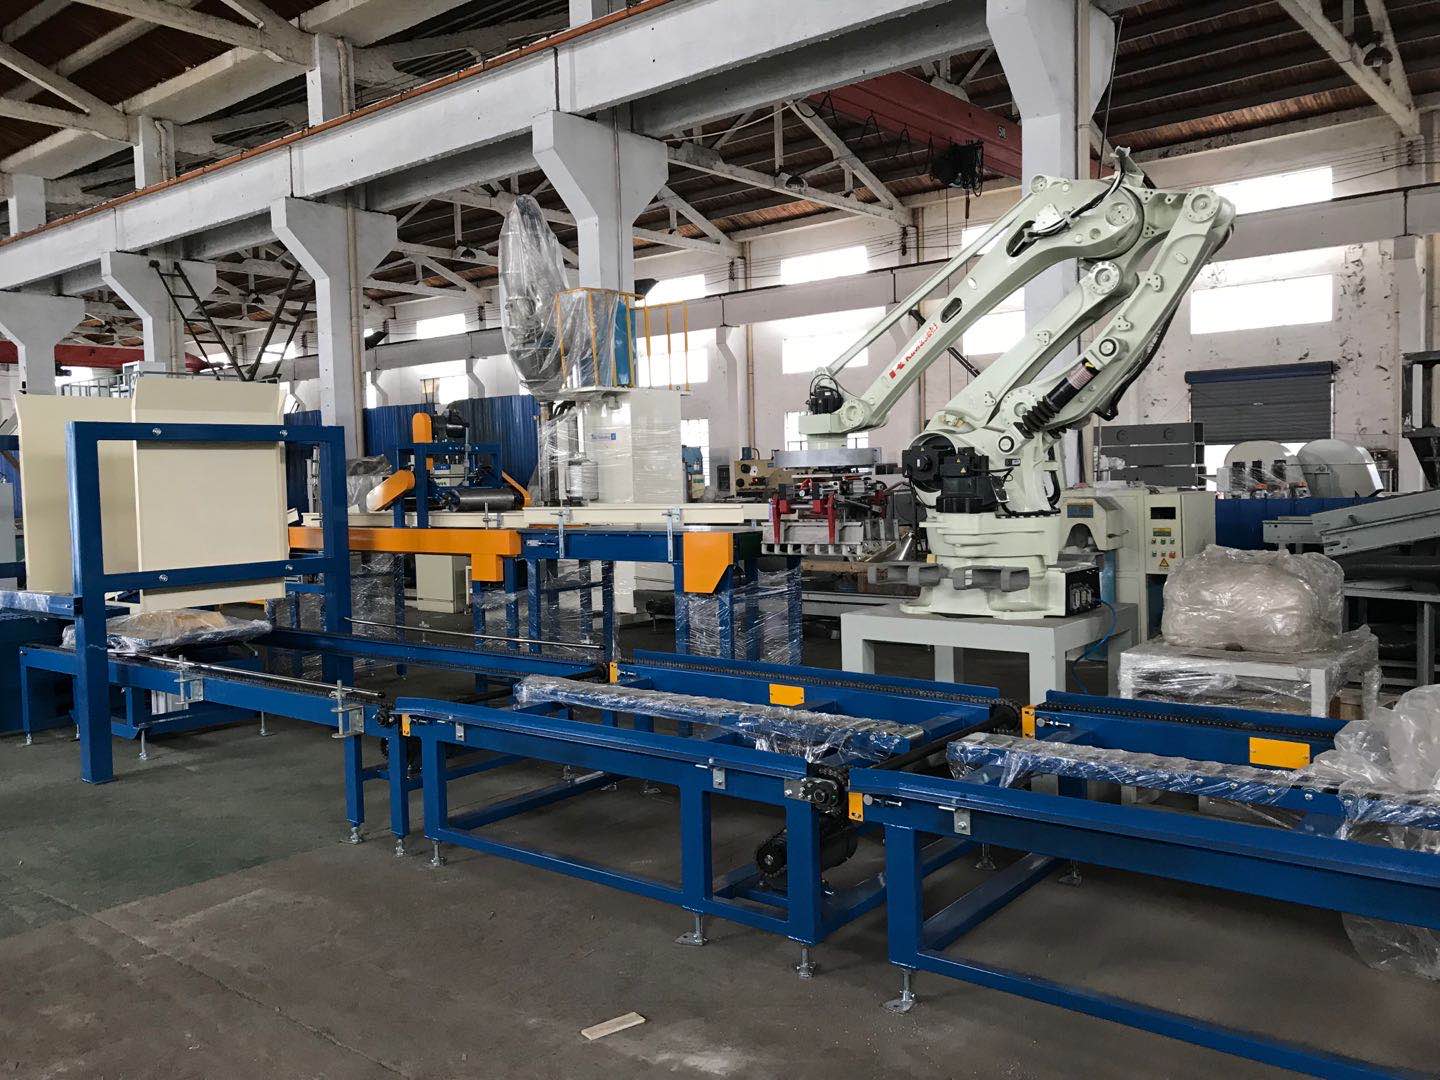 Dry Mix Mortar bagging equipment bagging machine Automated Bagging Line Fully Automatic Packing Palletizing Line, Fully Automatic Packing Line, Fully Automatic Bagging Line, Fully Automatic filling an